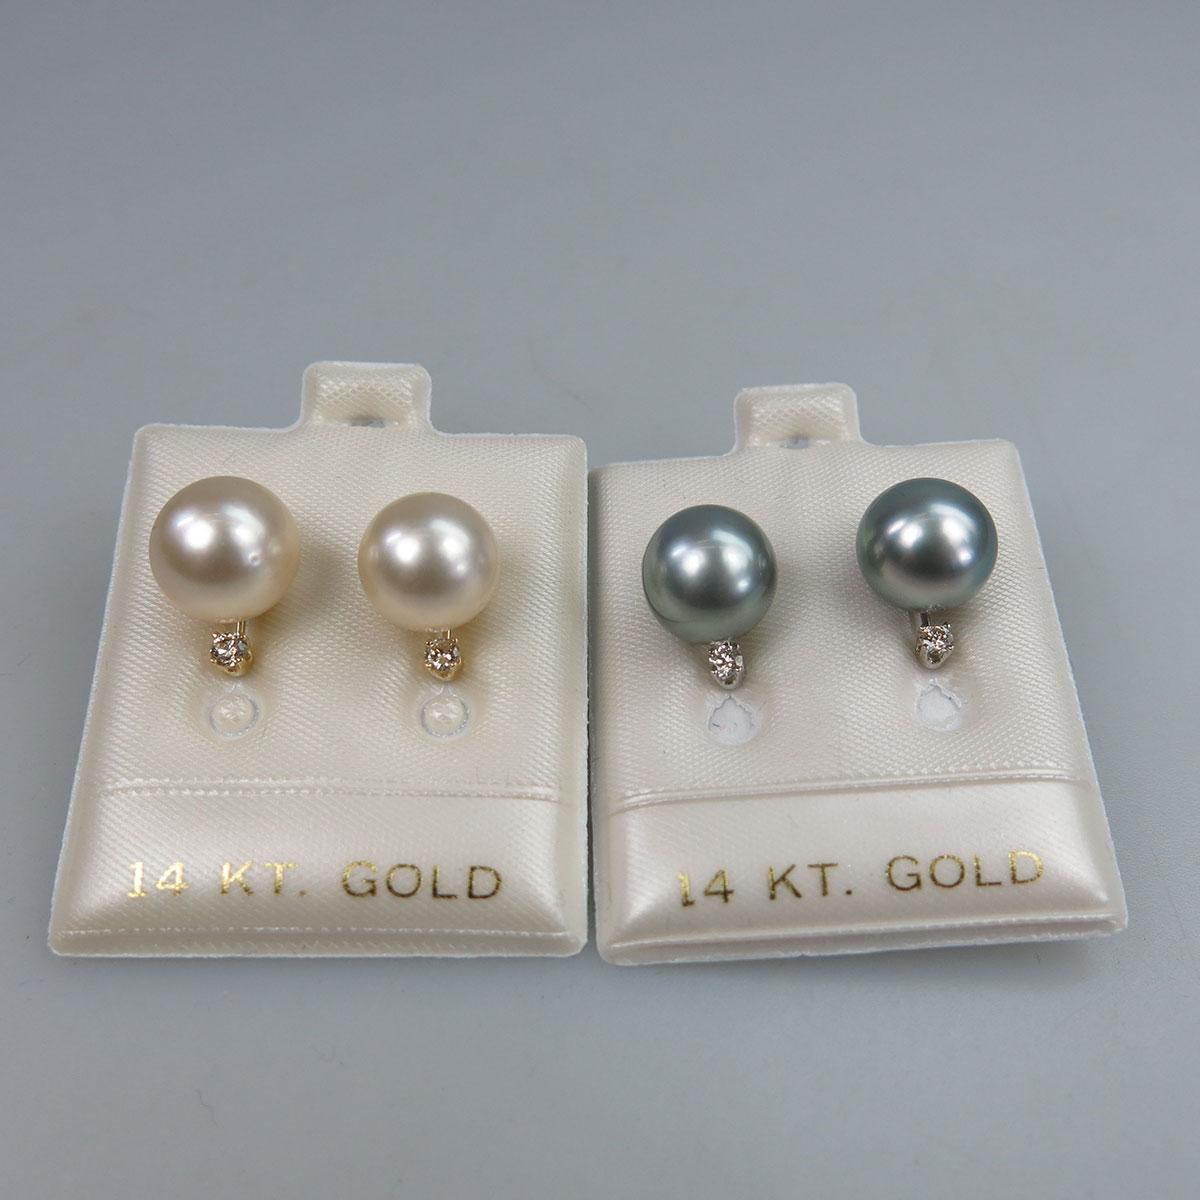 2 Pairs Of 14k Yellow Gold Stud Earrings